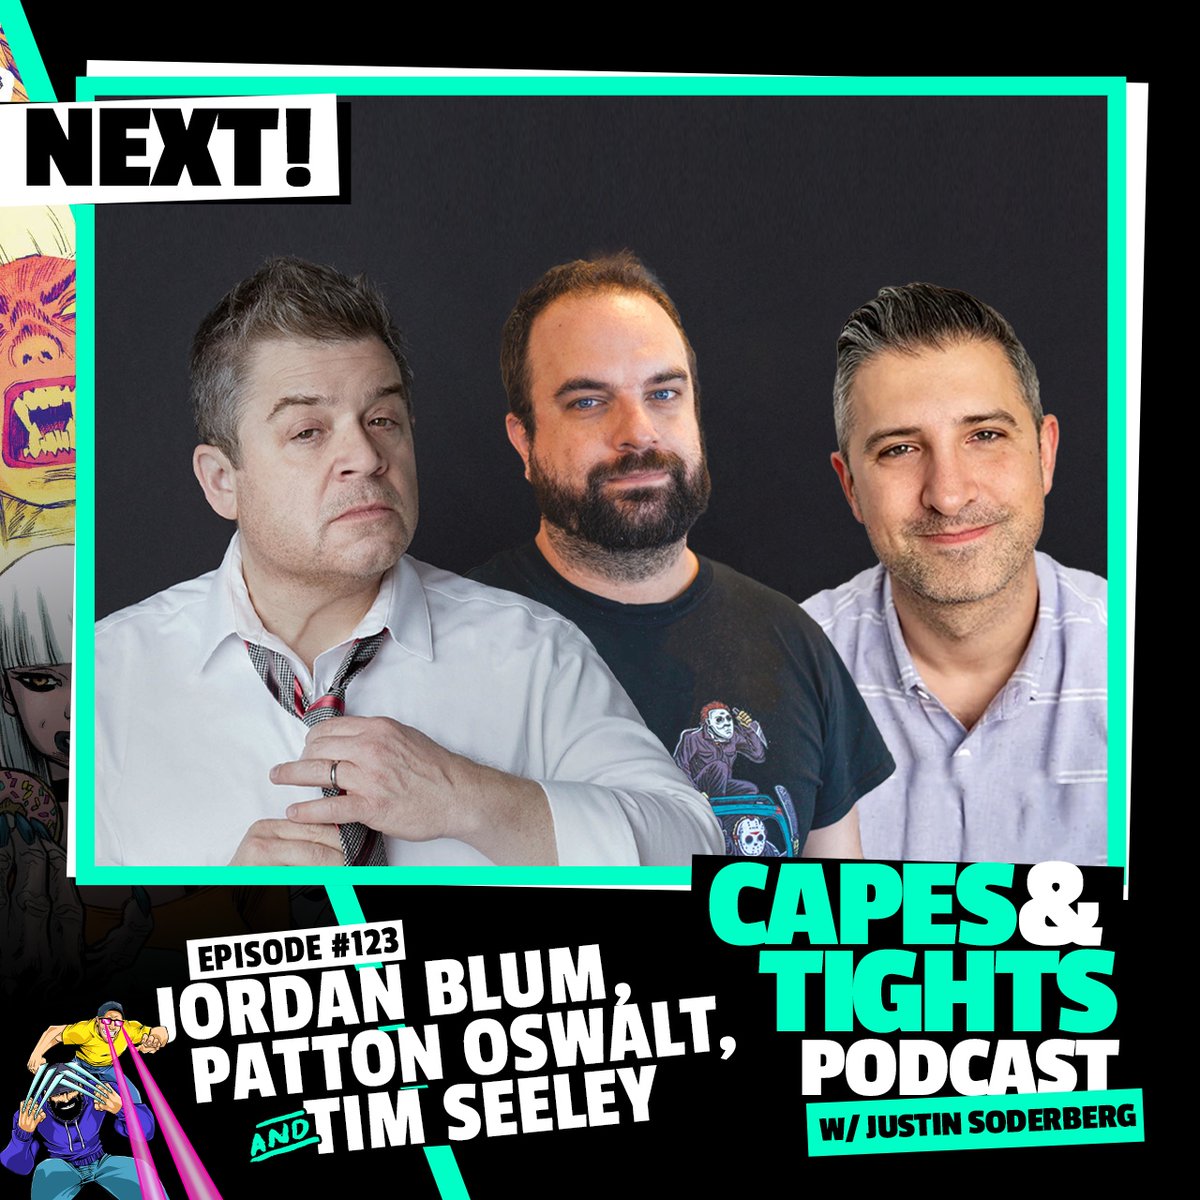 This Wednesday, Jordan Blum, Patton Oswalt and Tim Seeley join the Capes and Tights Podcast to discuss their comics #MinorThreats, #TheAlternates and much more! Subscribe on Apple or Spotify to make sure you don't miss this one!

capestights.com/links

#comics #comicbooks